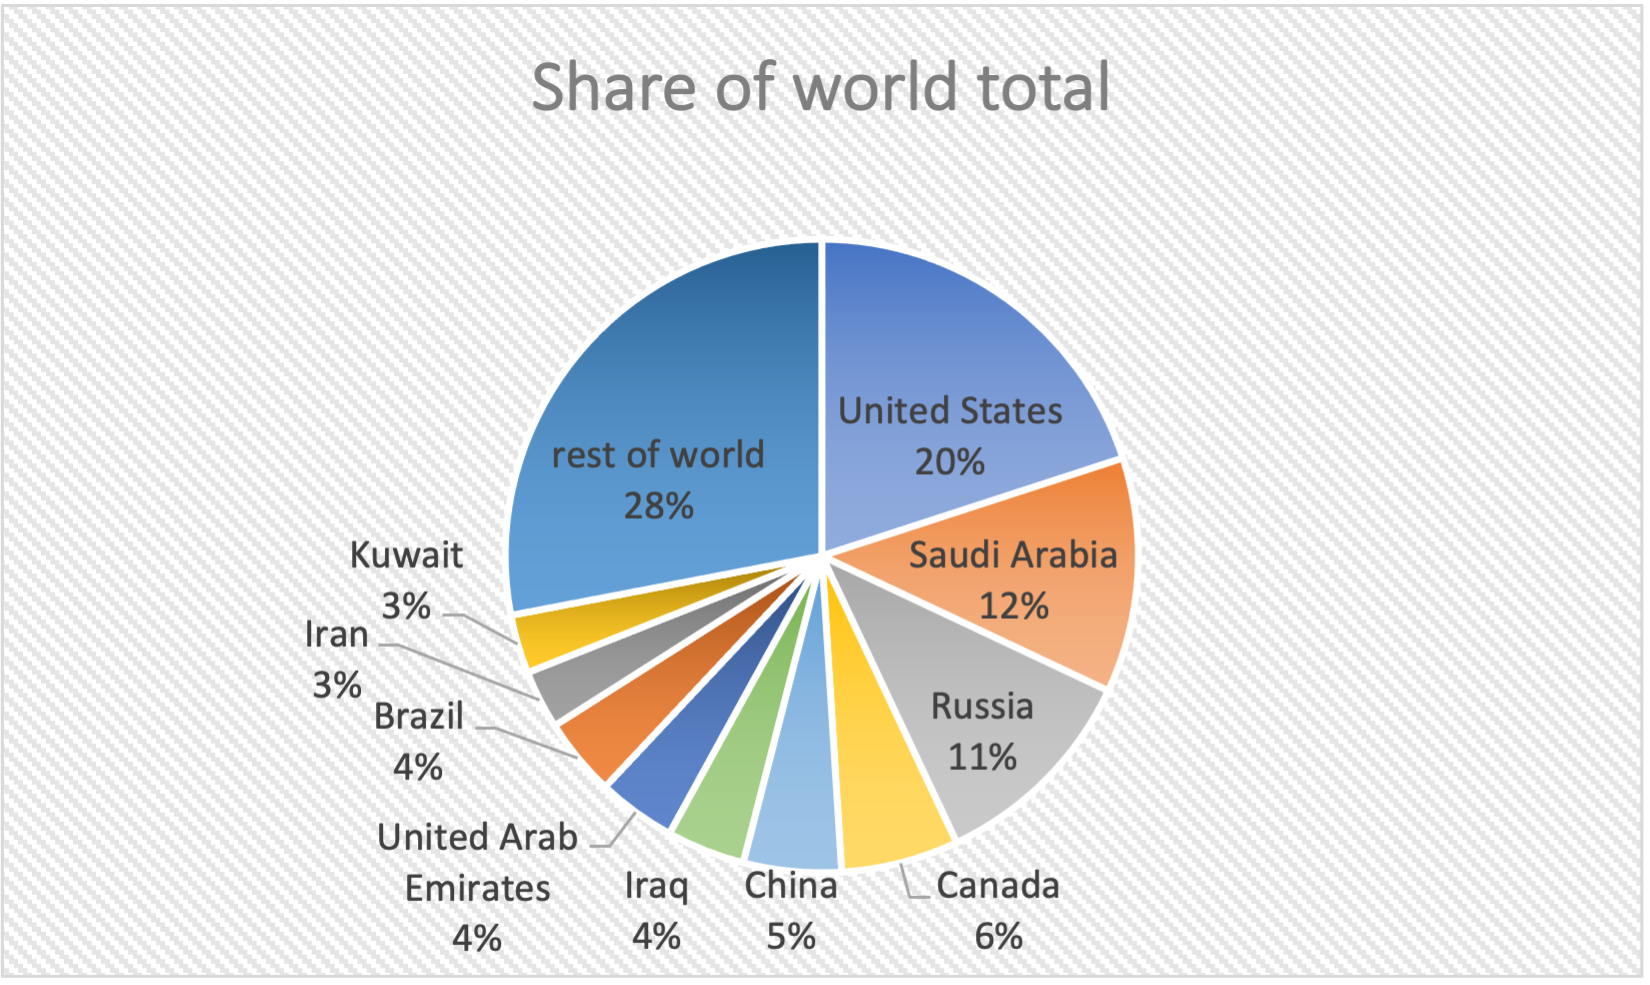 Full pie chart of Russia's share of total world oil production by percentage where Russia's 11% share makes it the third largest oil producer in the world